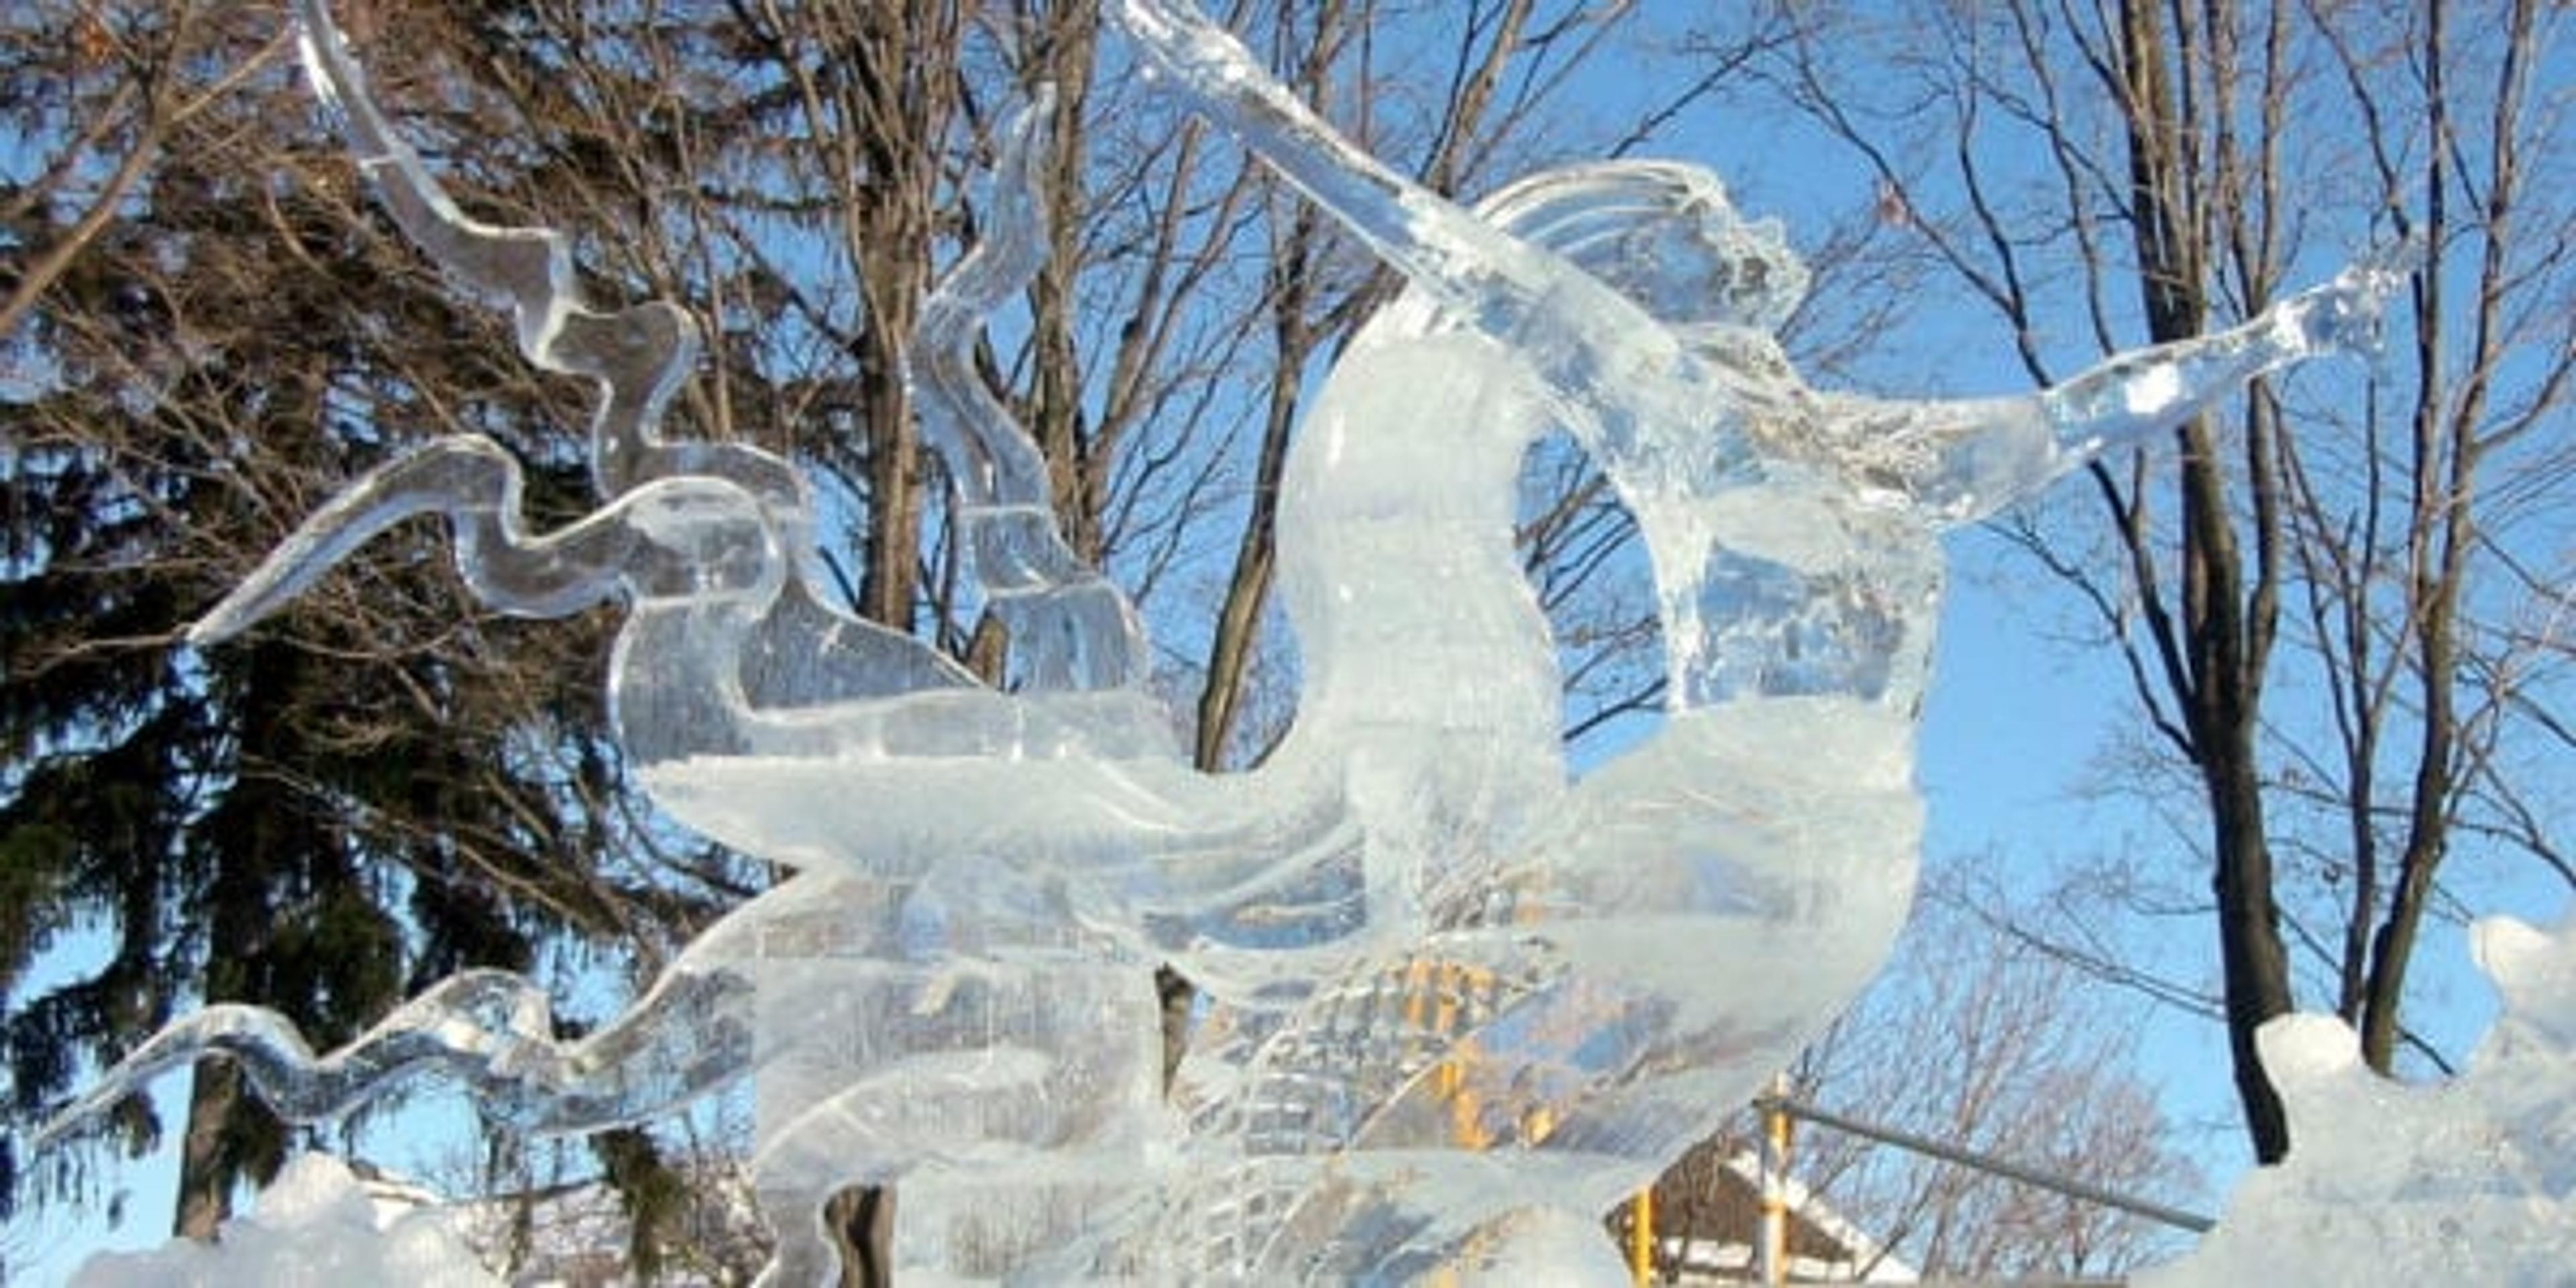 plymouth ice festival